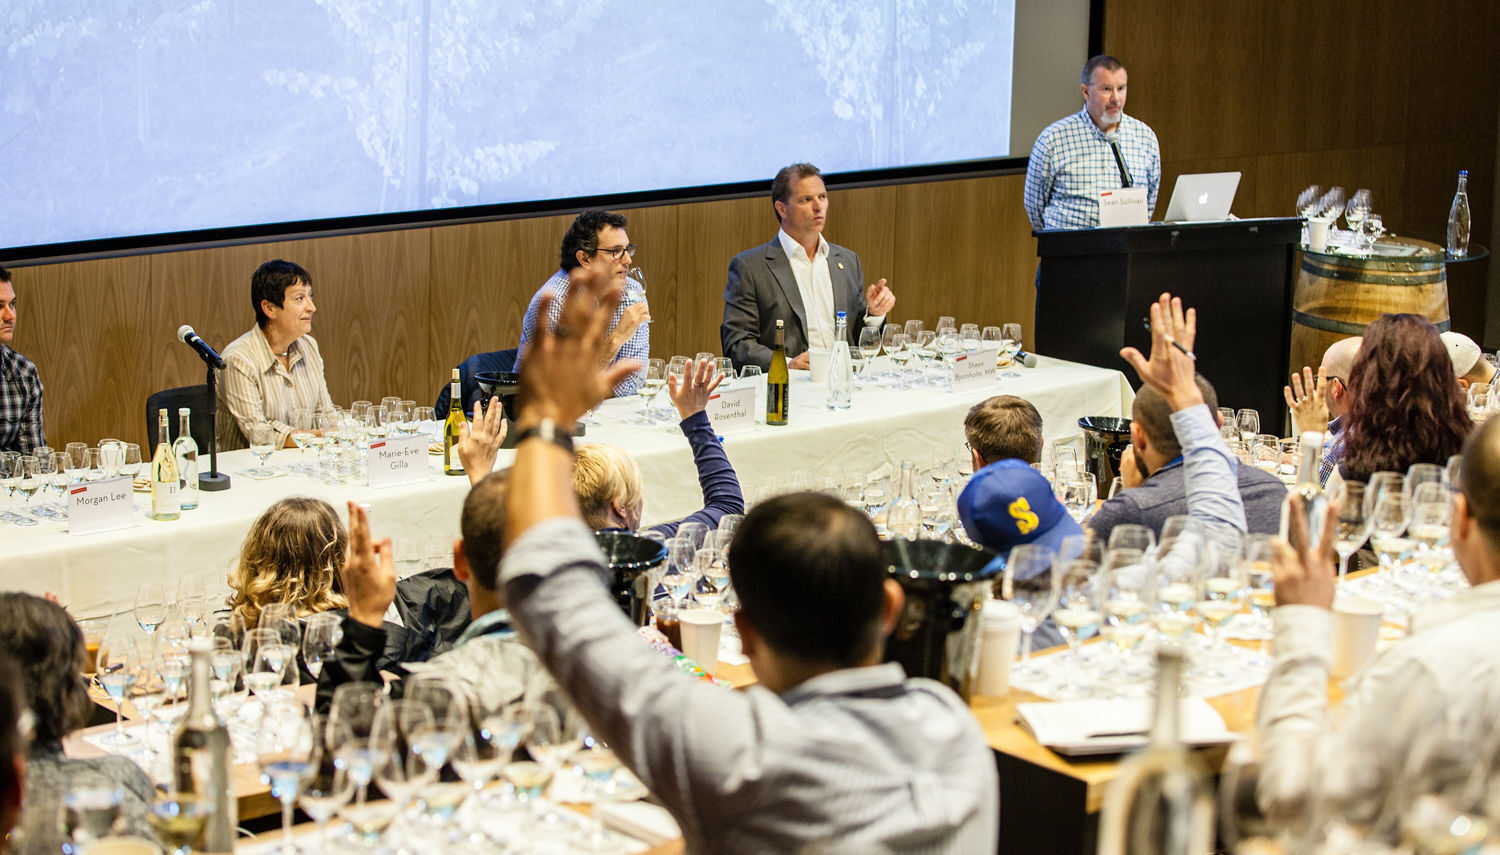 People sit at white tables with glasses of wine in front of them, raising their hands. There is a speaker at a podium and three other people seated at the front of the room.